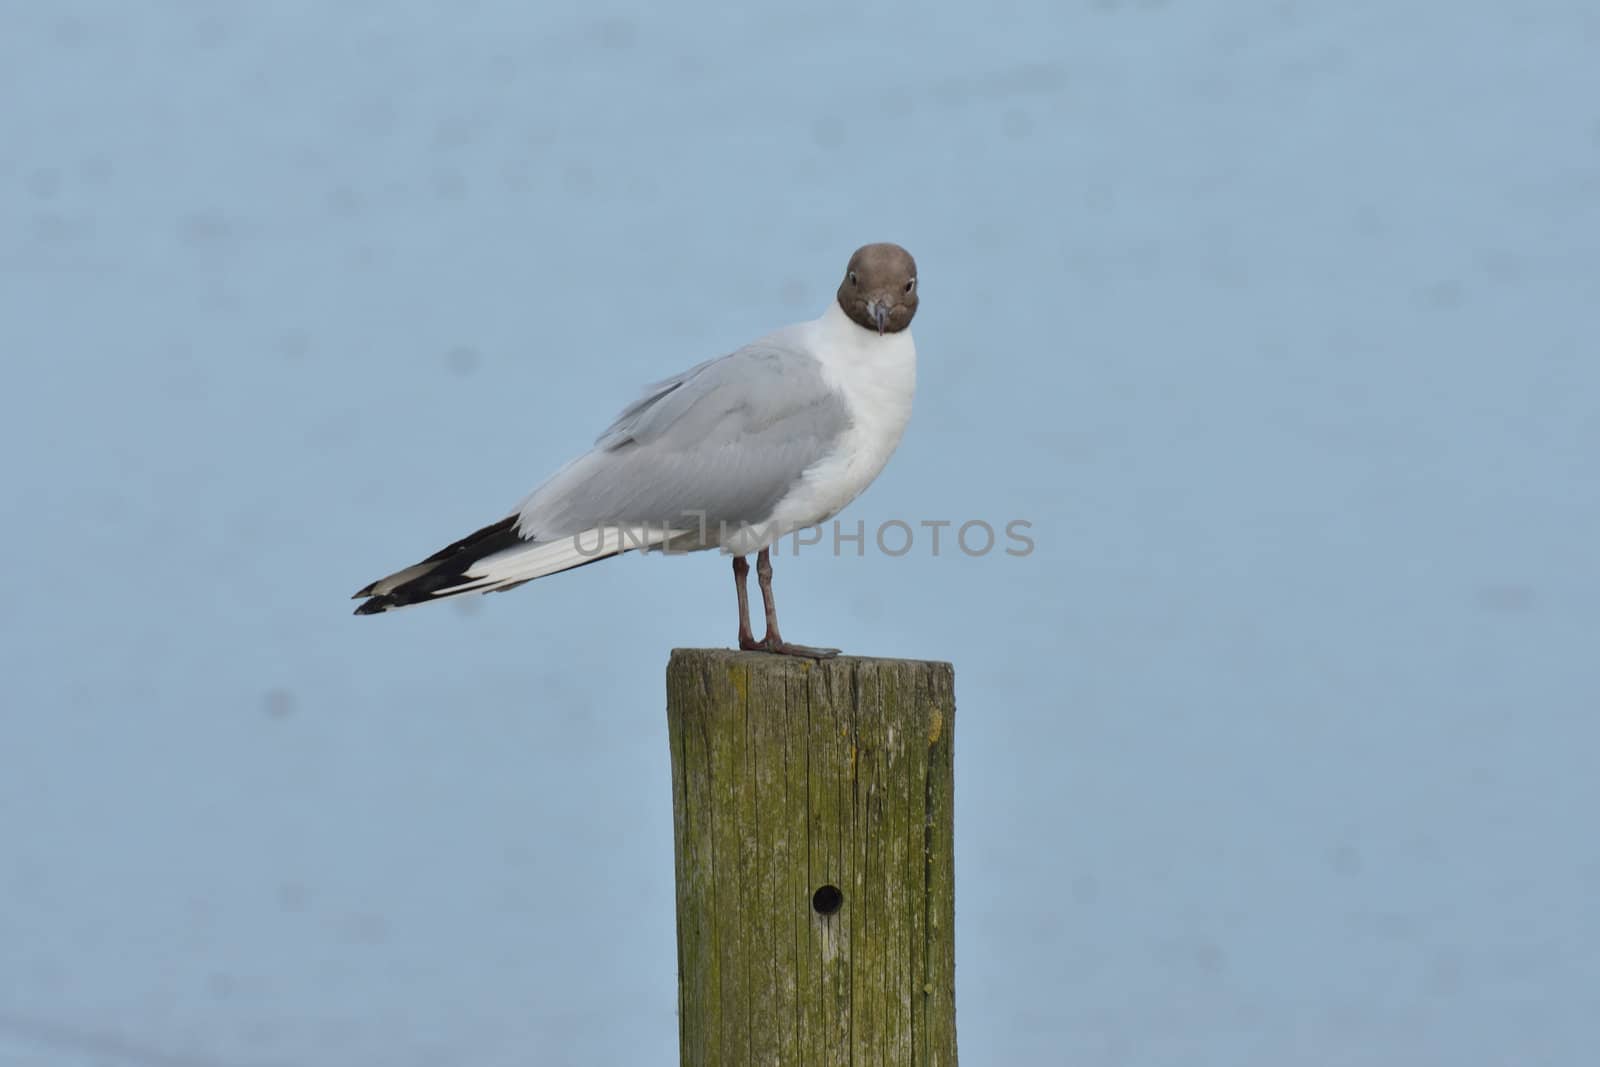 Gull on post looking towards camera by pauws99